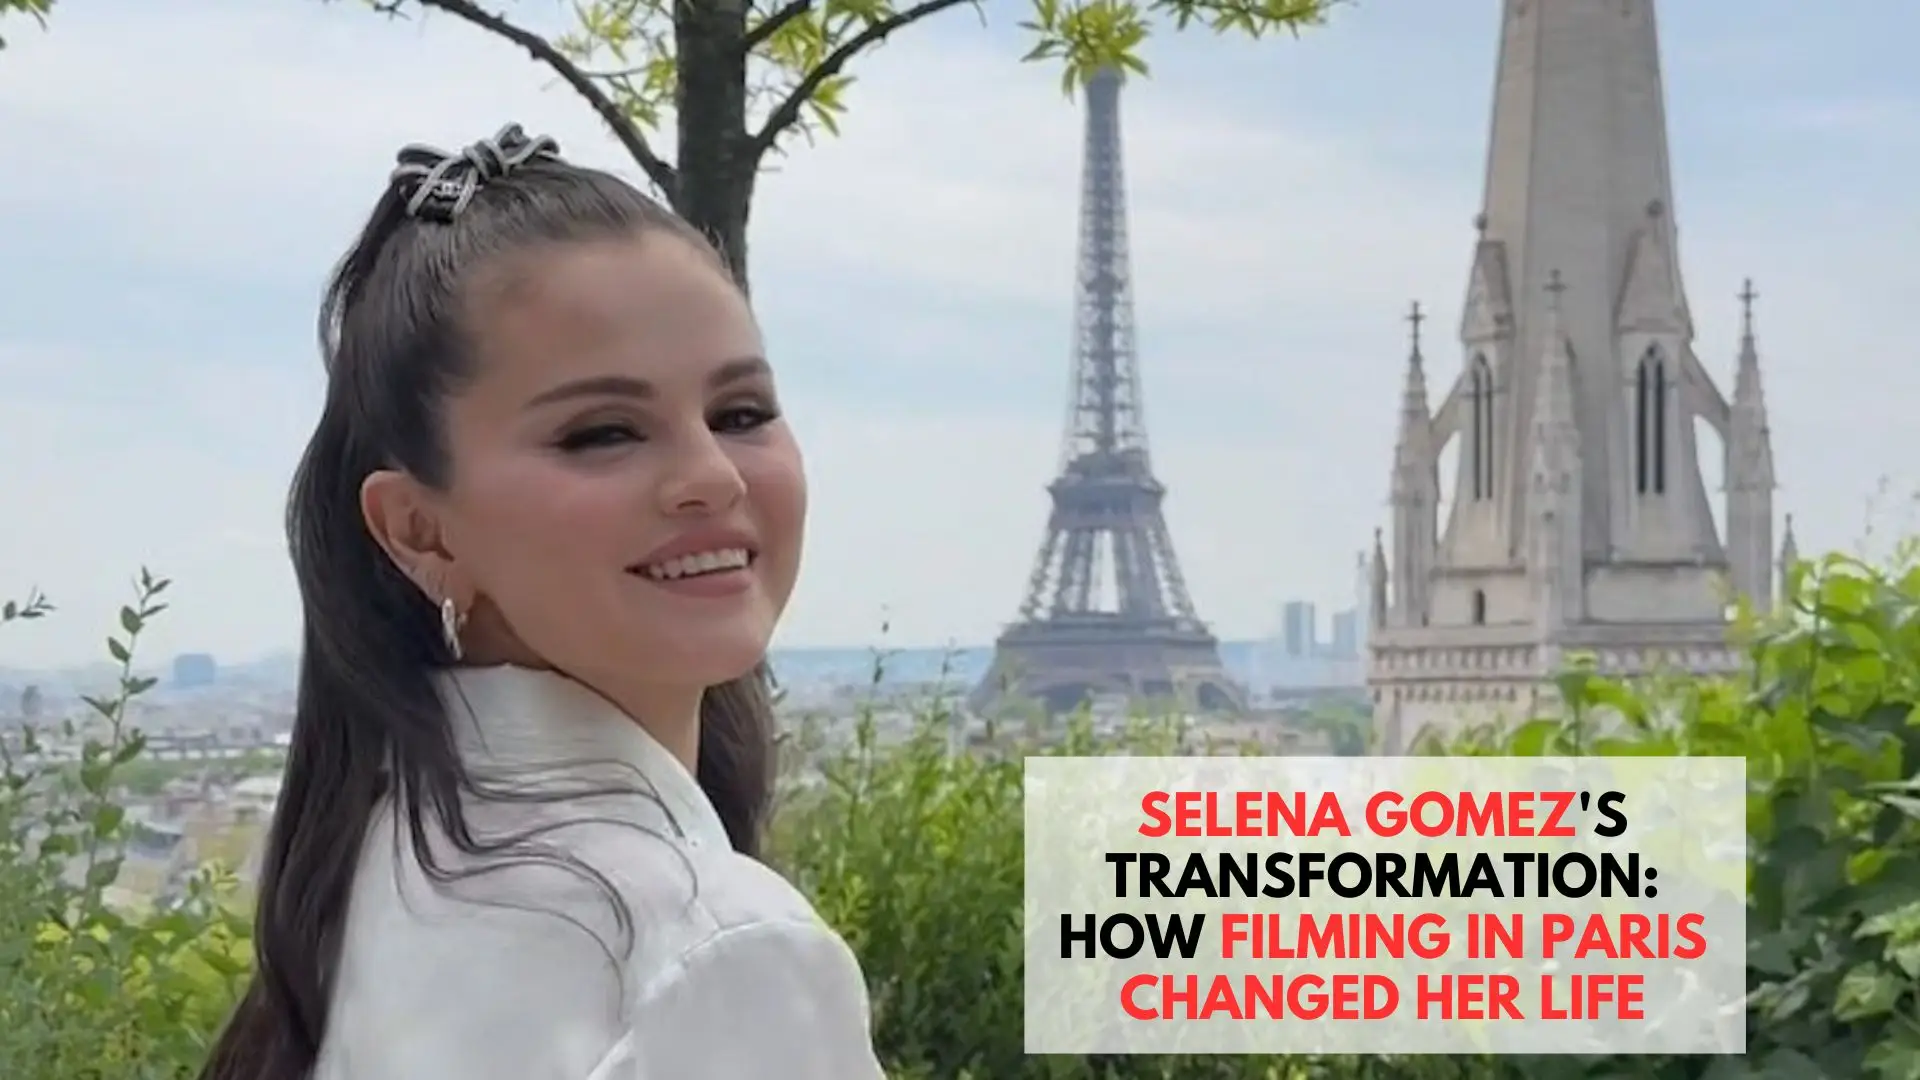 Selena Gomez's Transformation: How Filming in Paris Changed Her Life